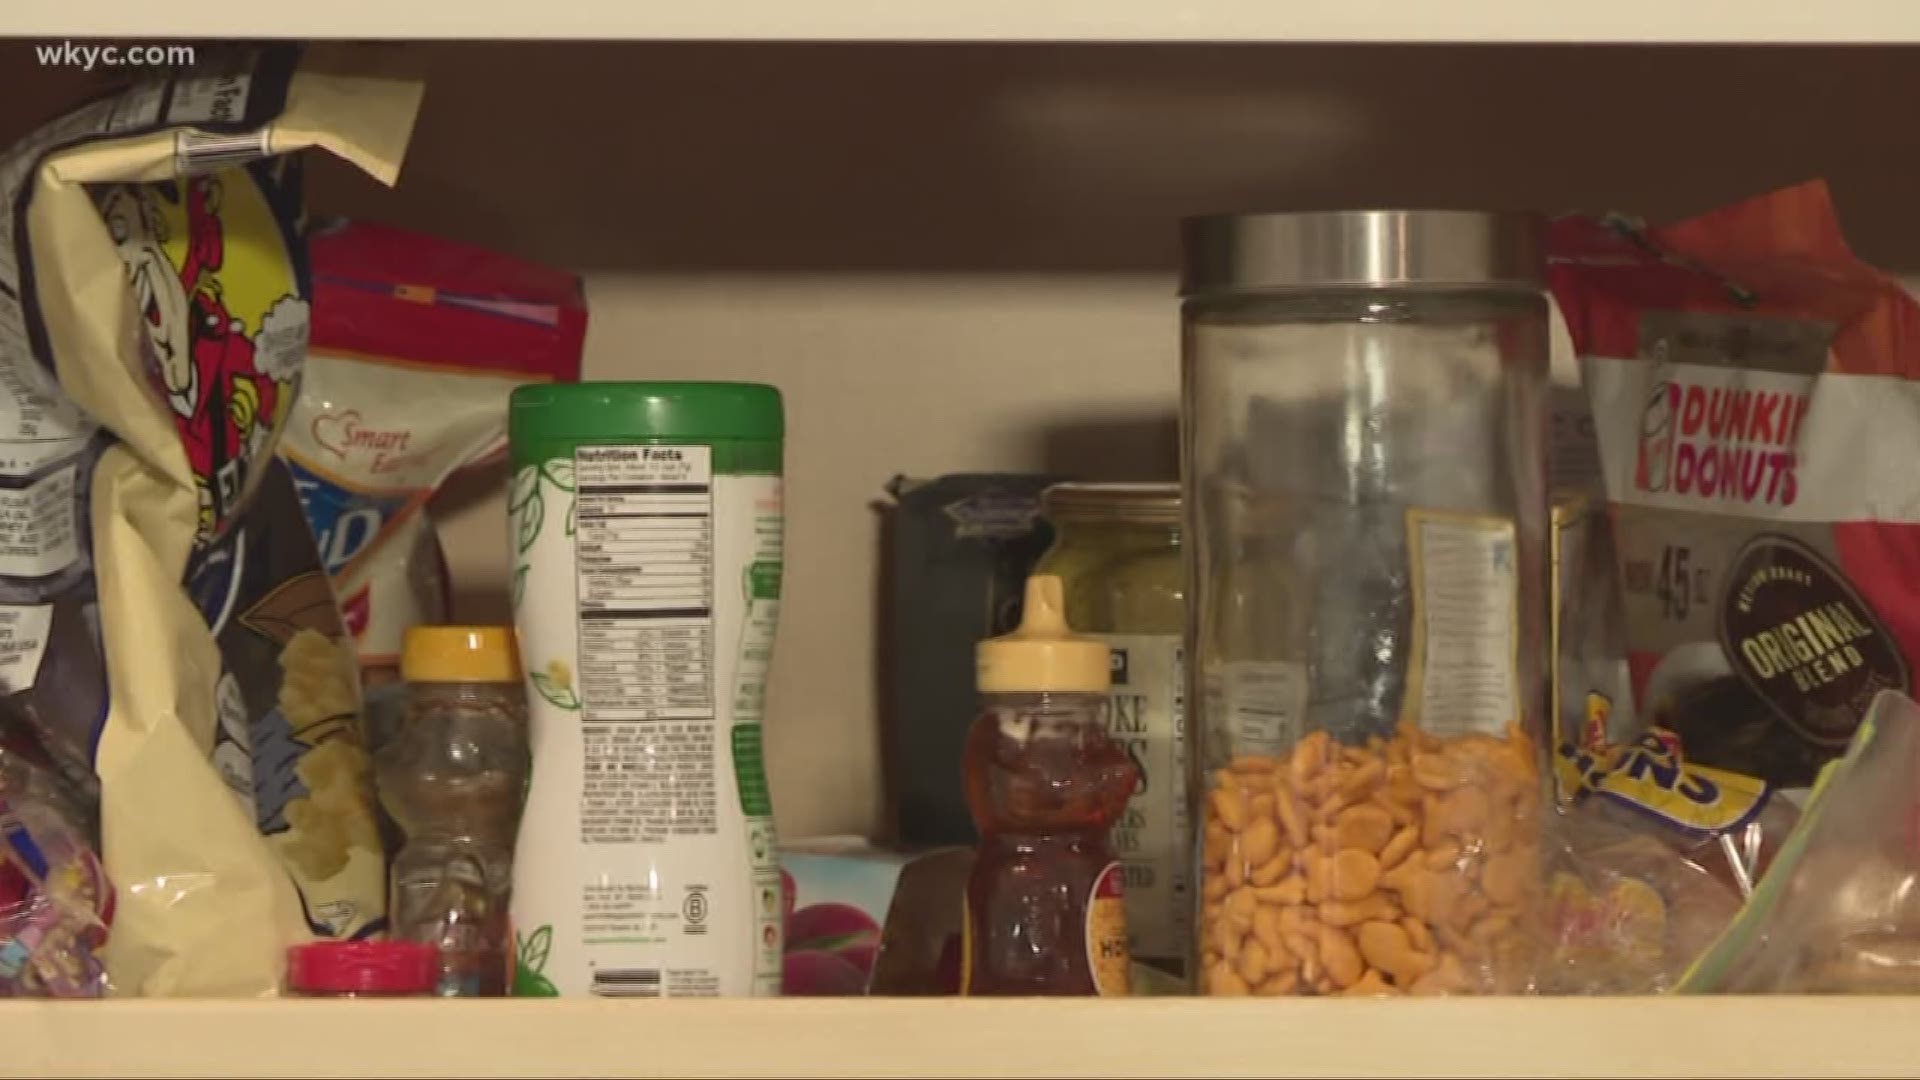 May 1, 2019: Lauren Herzog of All Things Organized offers her expert advice to our own Maureen Kyle on how to better organize her pantry.